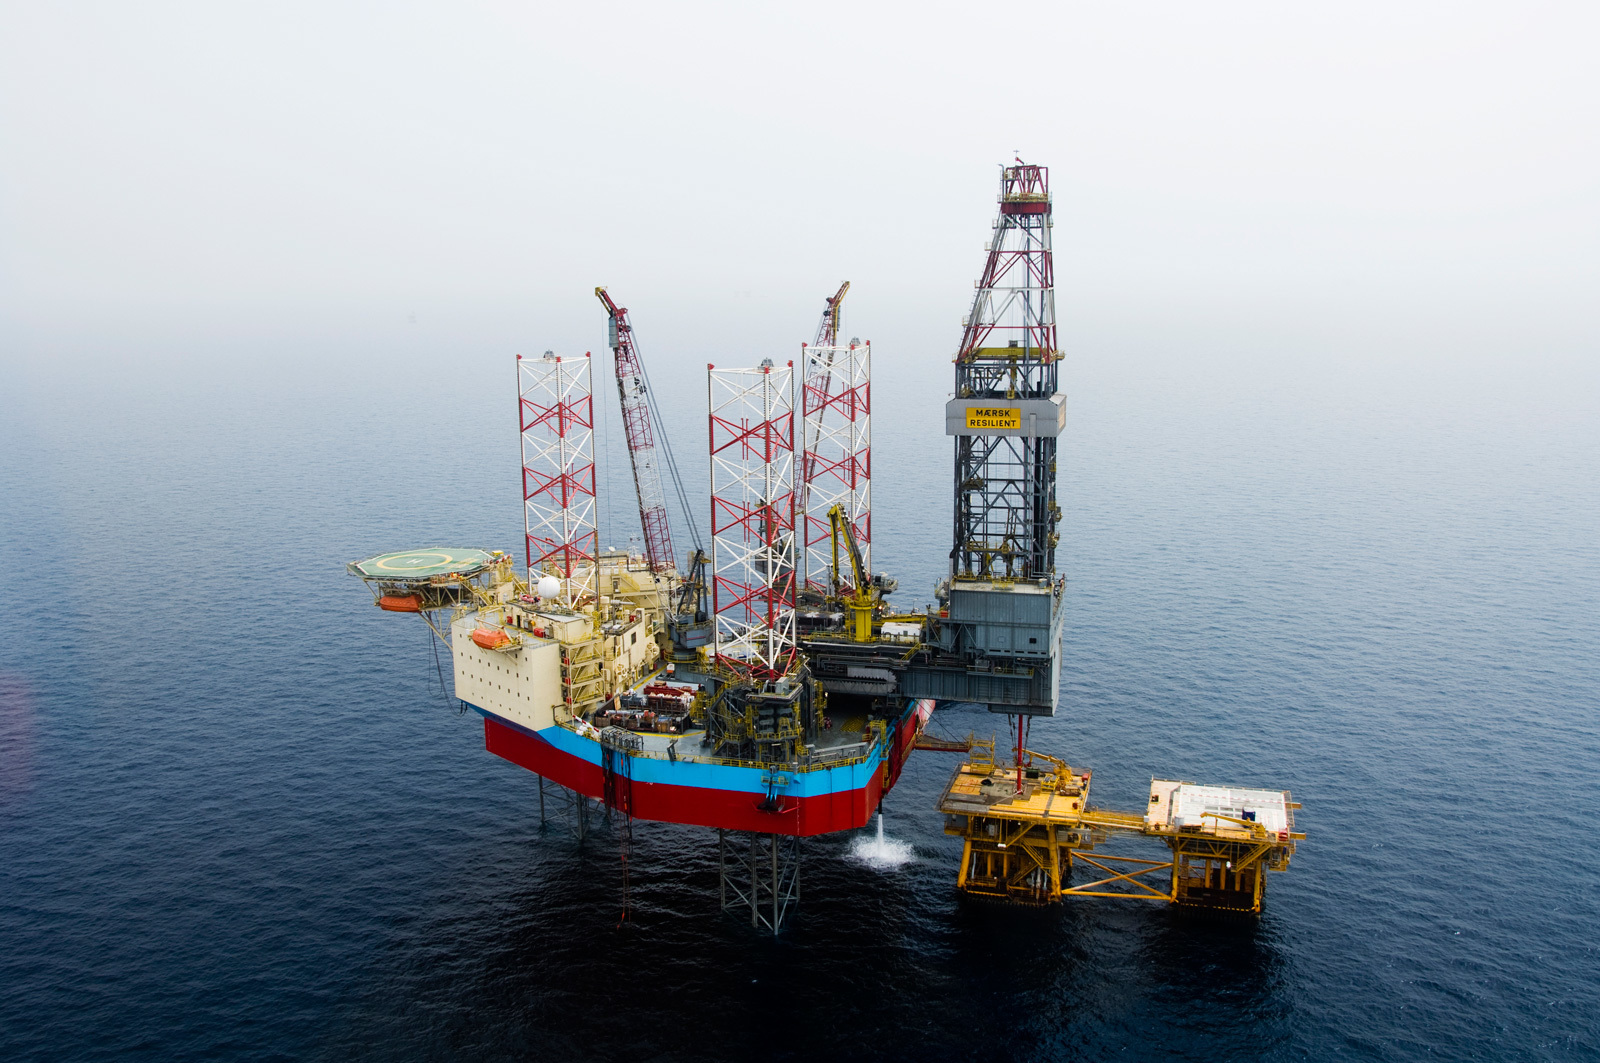 The Maersk Resilient jack-up rig, which was drilling the Lacewing well